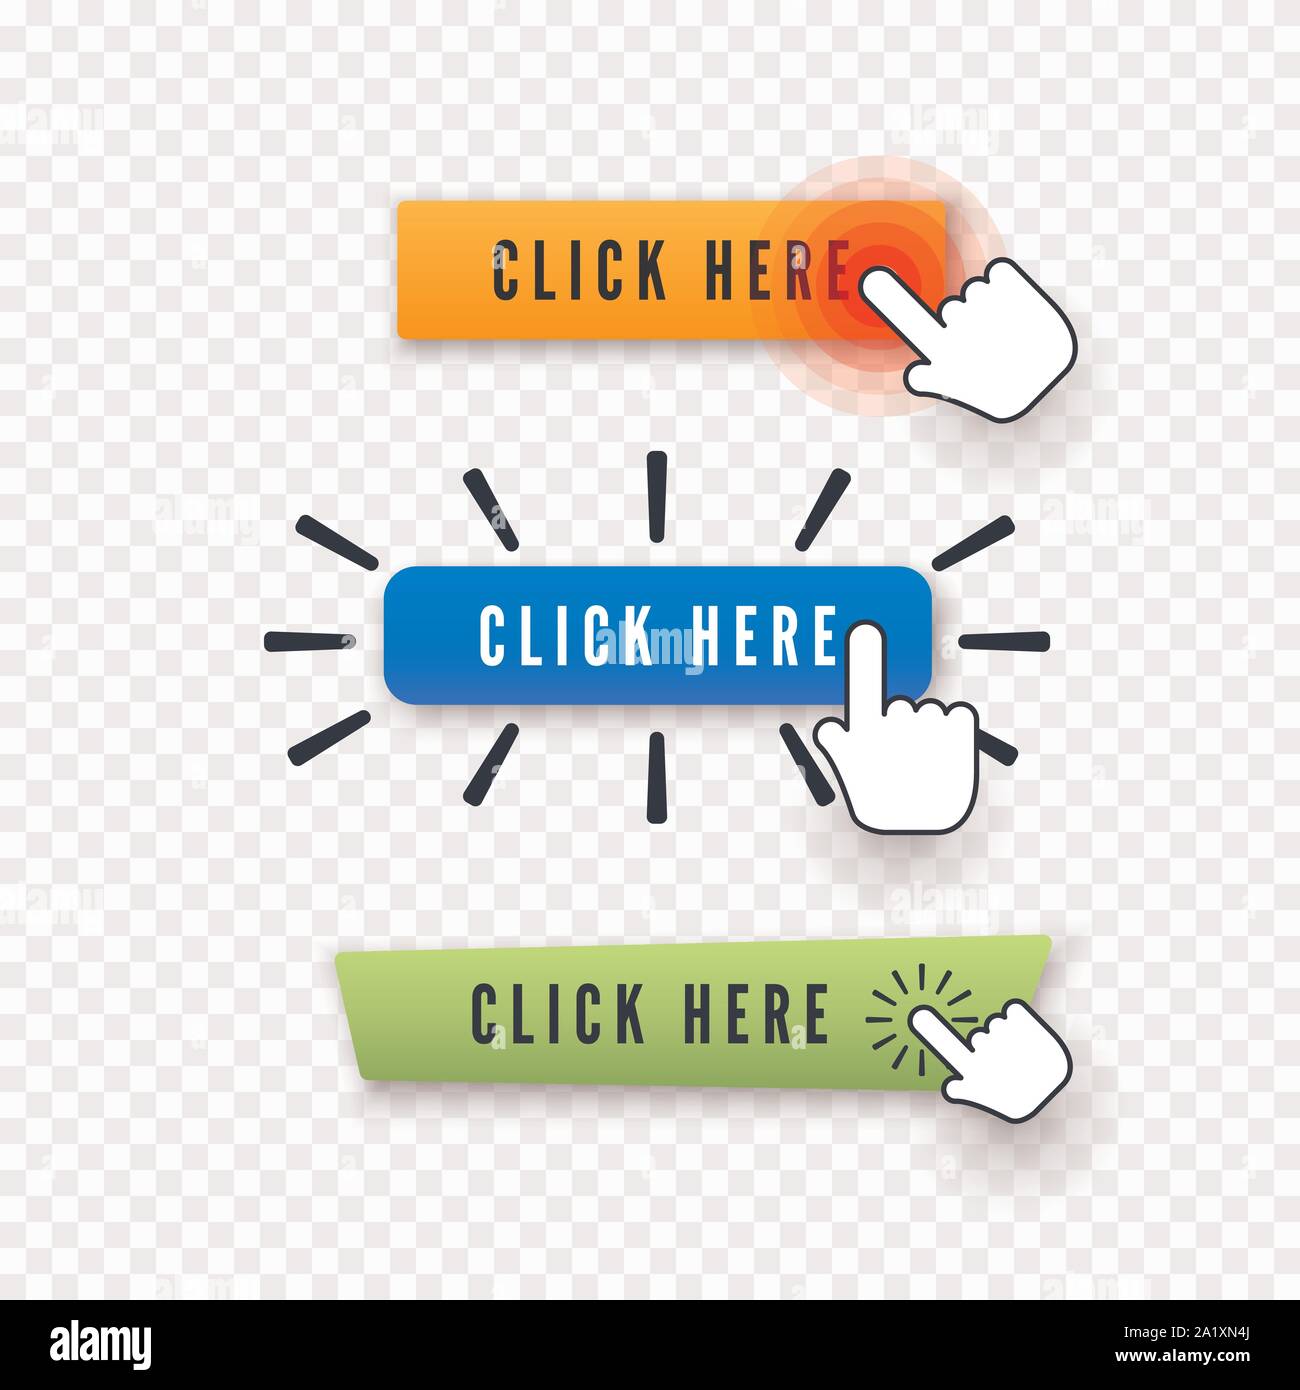 Hand cursor over button with text click here. Web icons element. Set of different buttons. Vector illustration isolated on transparent background Stock Vector